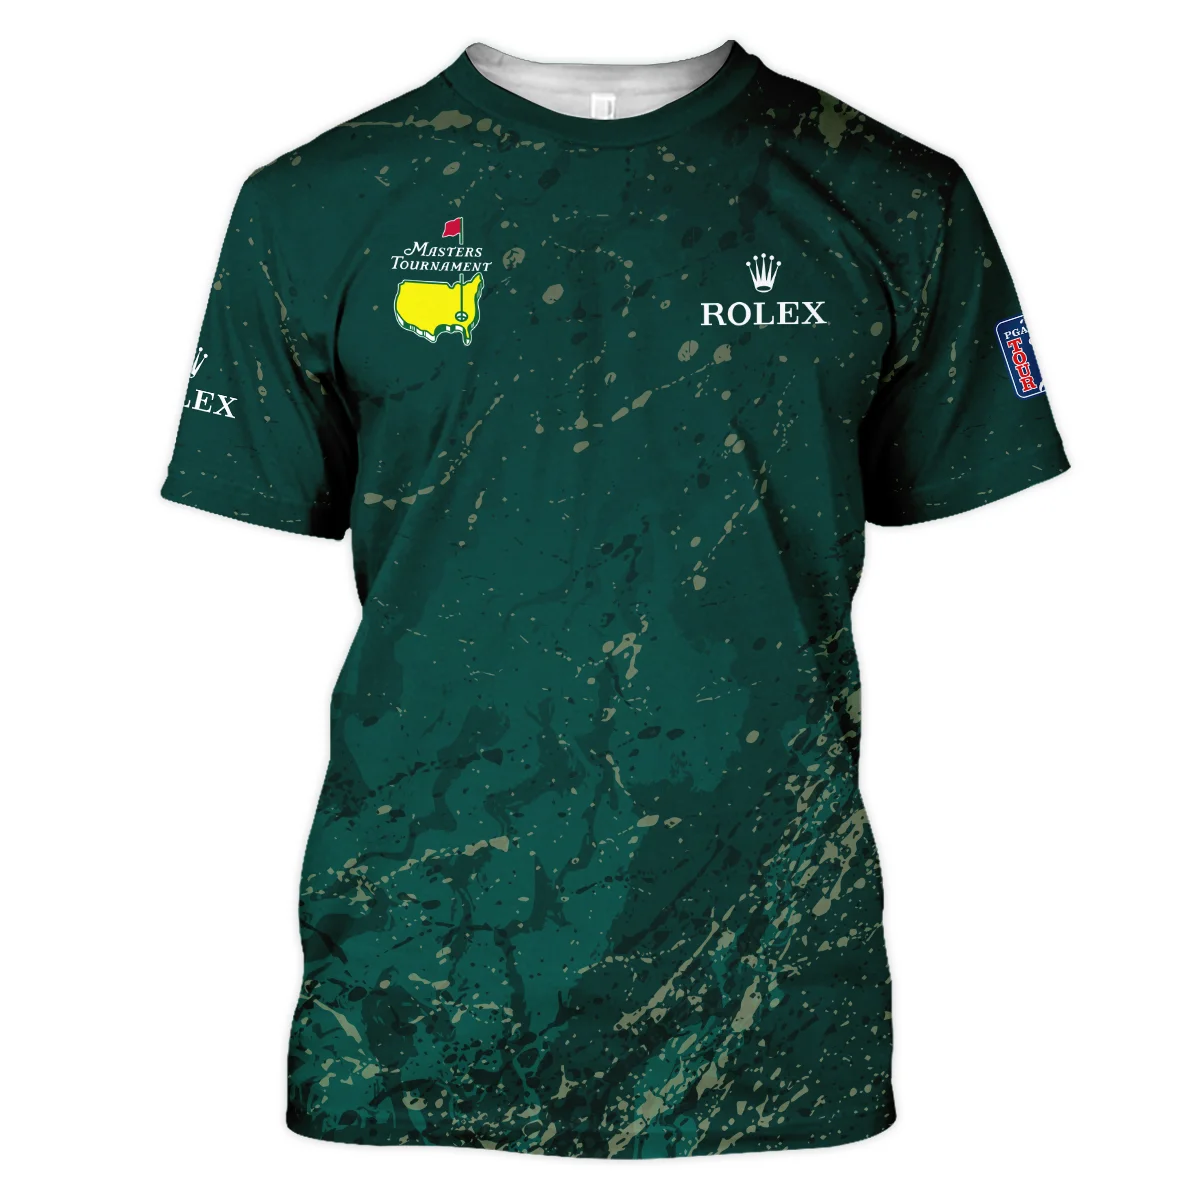 Old Cracked Texture With Gold Splash Paint Masters Tournament Rolex Long Polo Shirt Style Classic Long Polo Shirt For Men